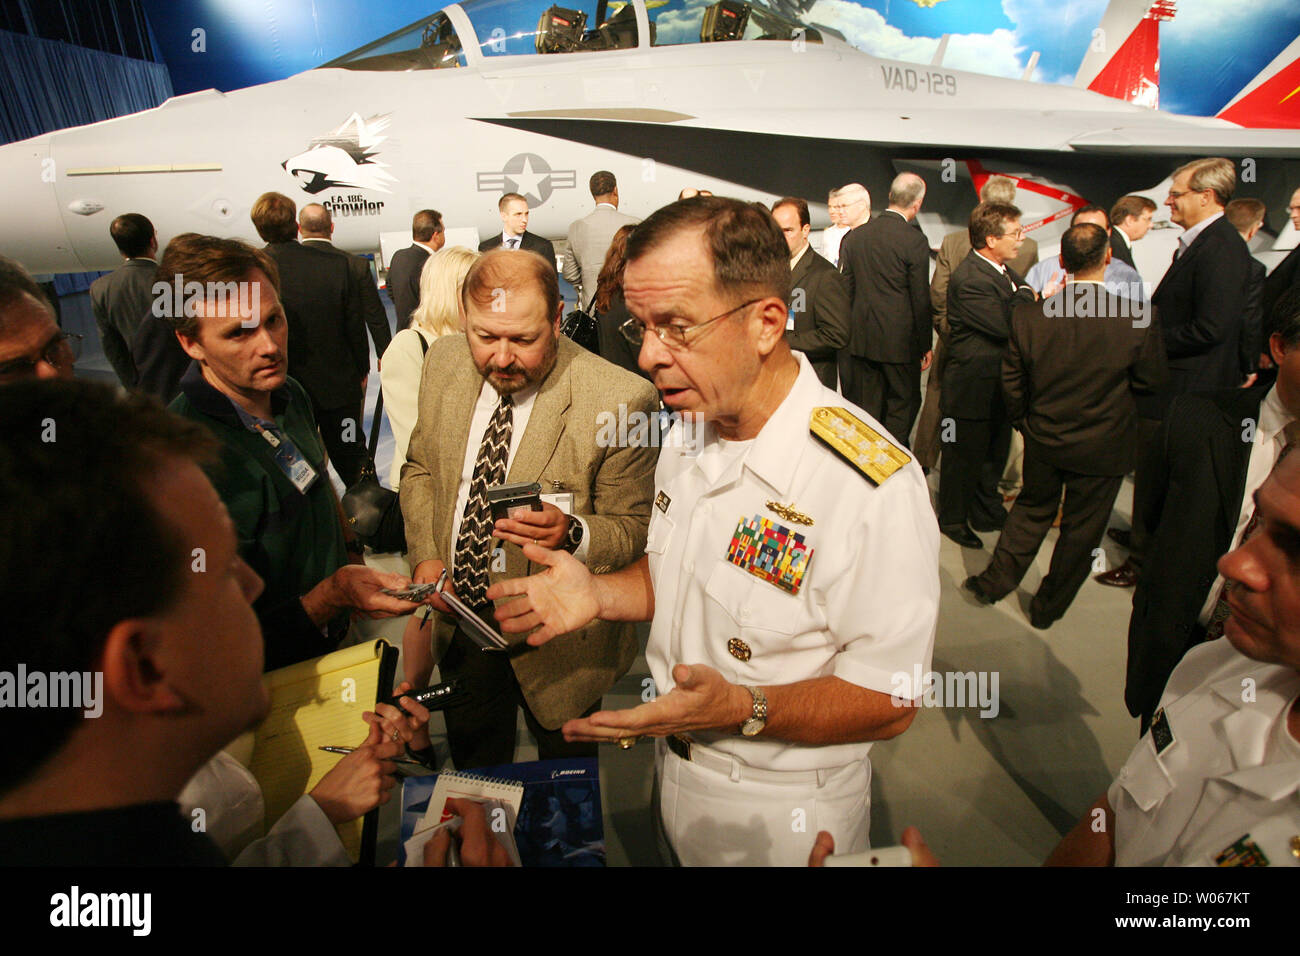 Admiral Michael Mullen, Chief of Naval Operations for the United States Navy, talks with reporters after a rollout of the new EA-18G Growler airborne electronic aircraft, at the  Boeing aircraft assembly plant in St. Louis on August 3, 2006. The plane is a two-seat F/A-18F Super Hornet with an advanced weapons, sensors and communications systems. (UPI Photo/Bill Greenblatt) Stock Photo